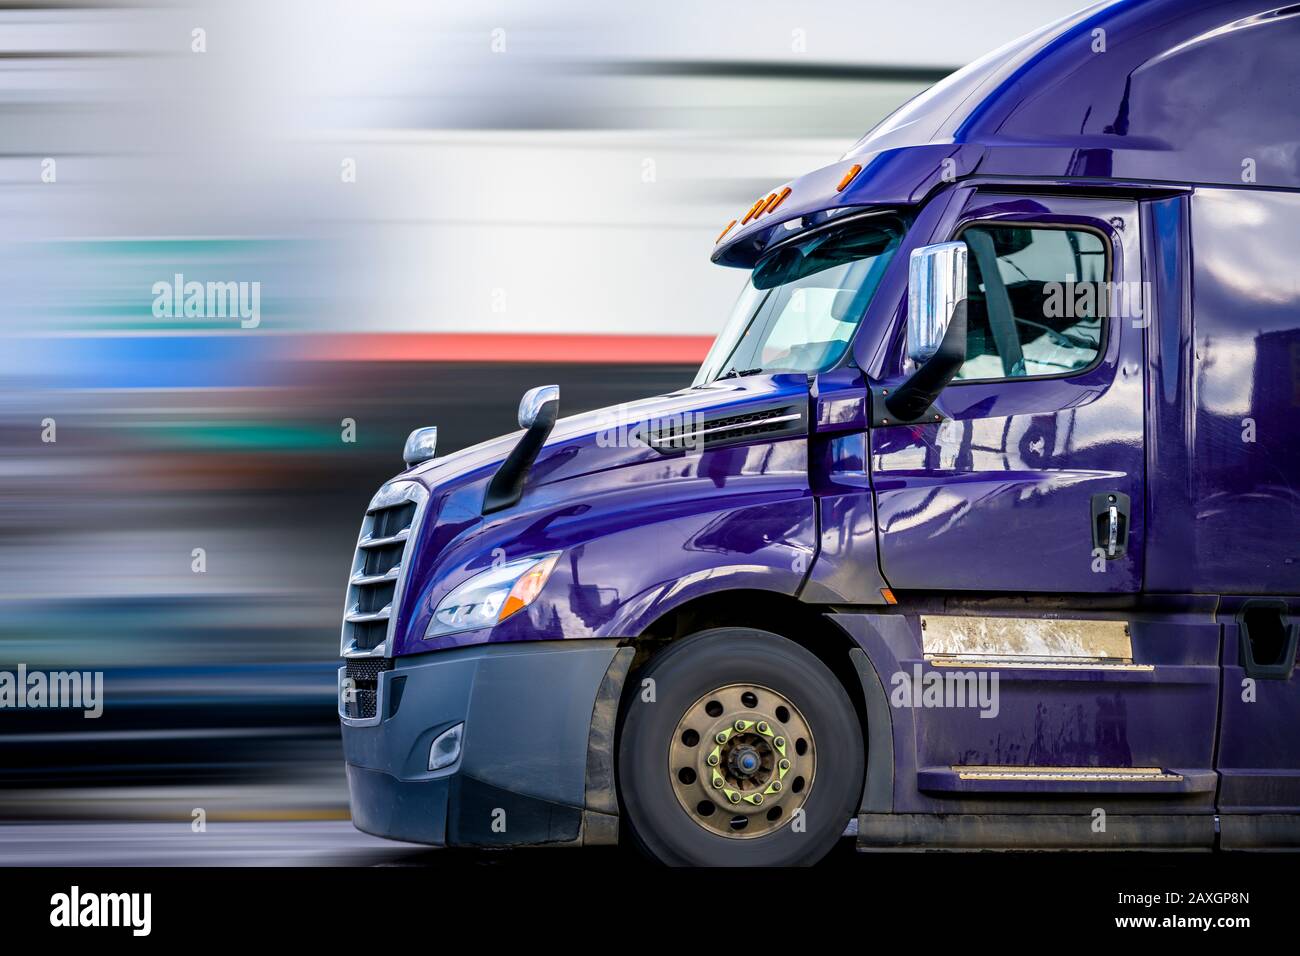 Bright Purple Bonnet Big rig long haul diesel Semi Truck with high cab configuration for improve aerodynamics transporting Commercial Cargo Driving on Stock Photo